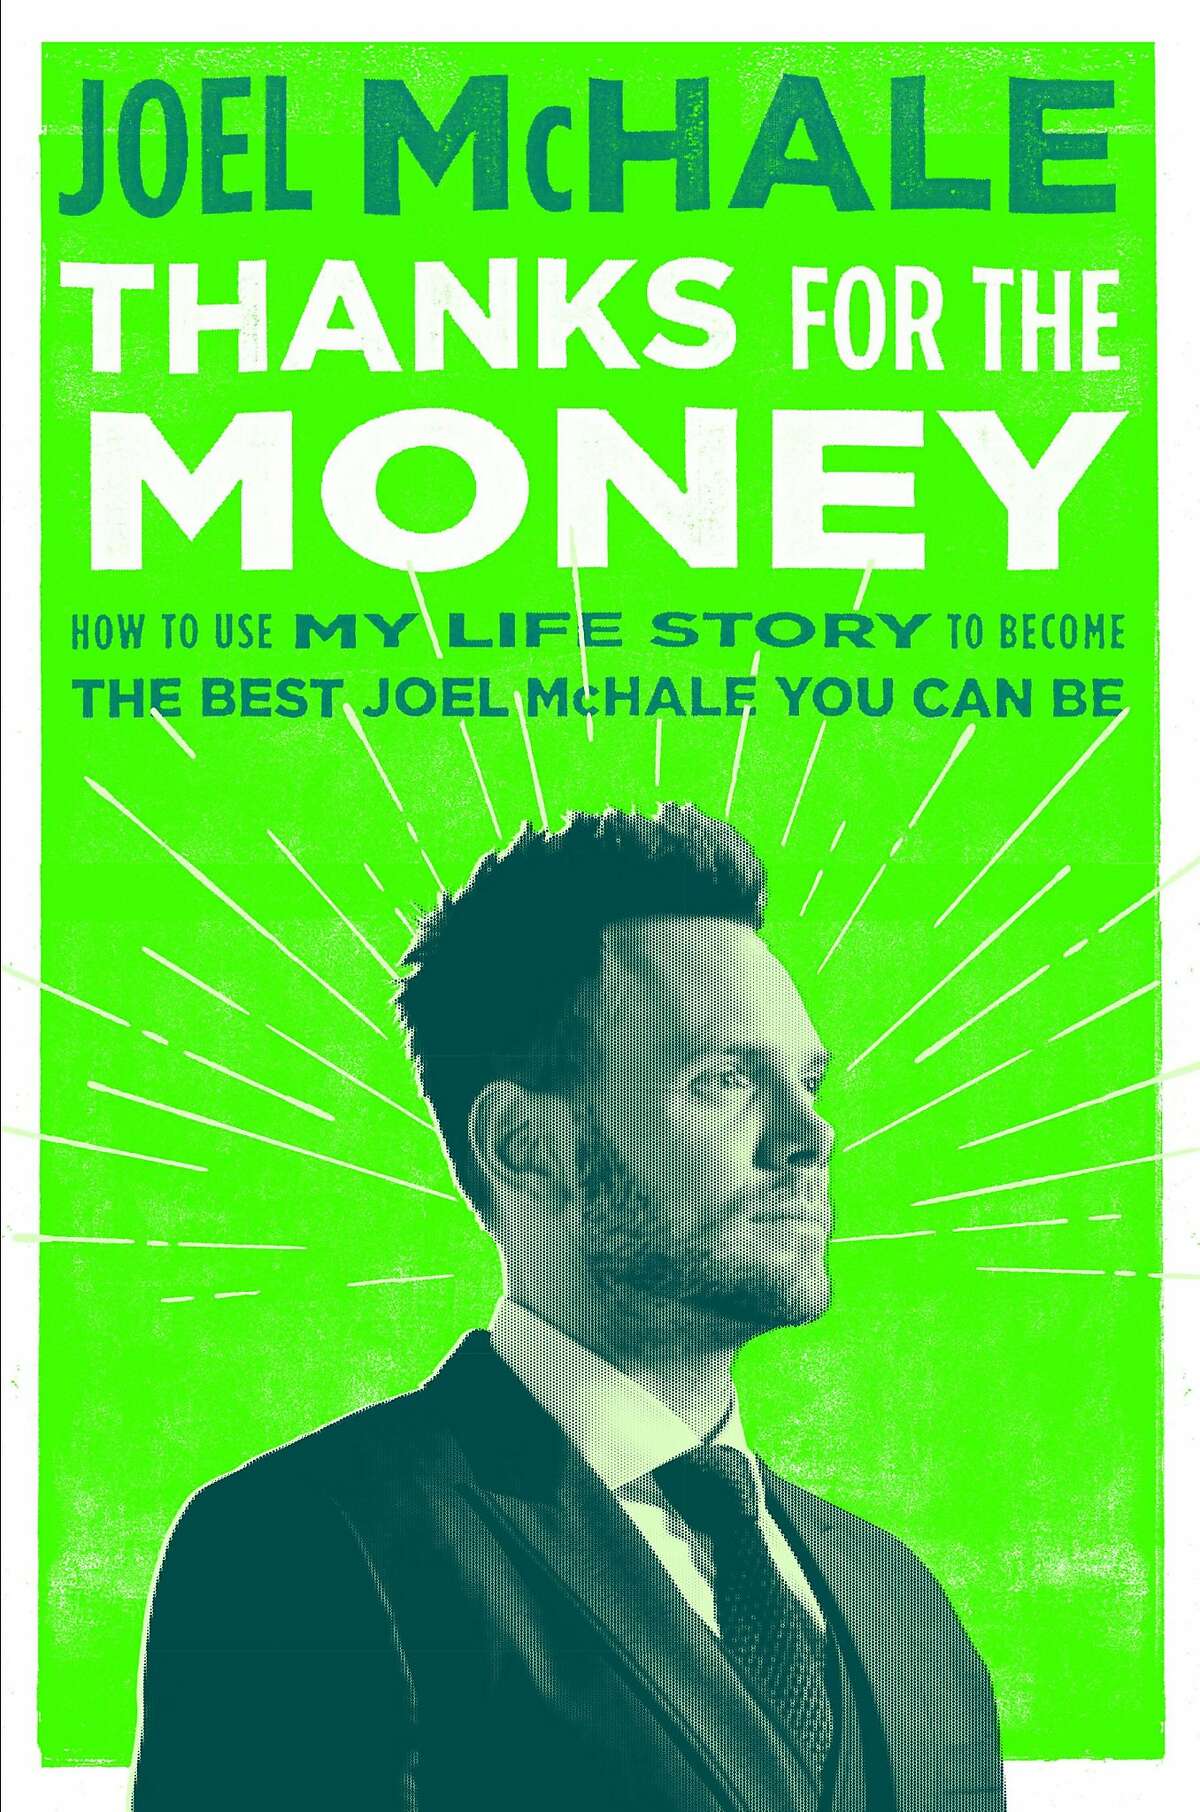 "Thanks for the Money: How to Use My Life Story to Become the Best Joel McHale You Can Be" (Random House/TNS)